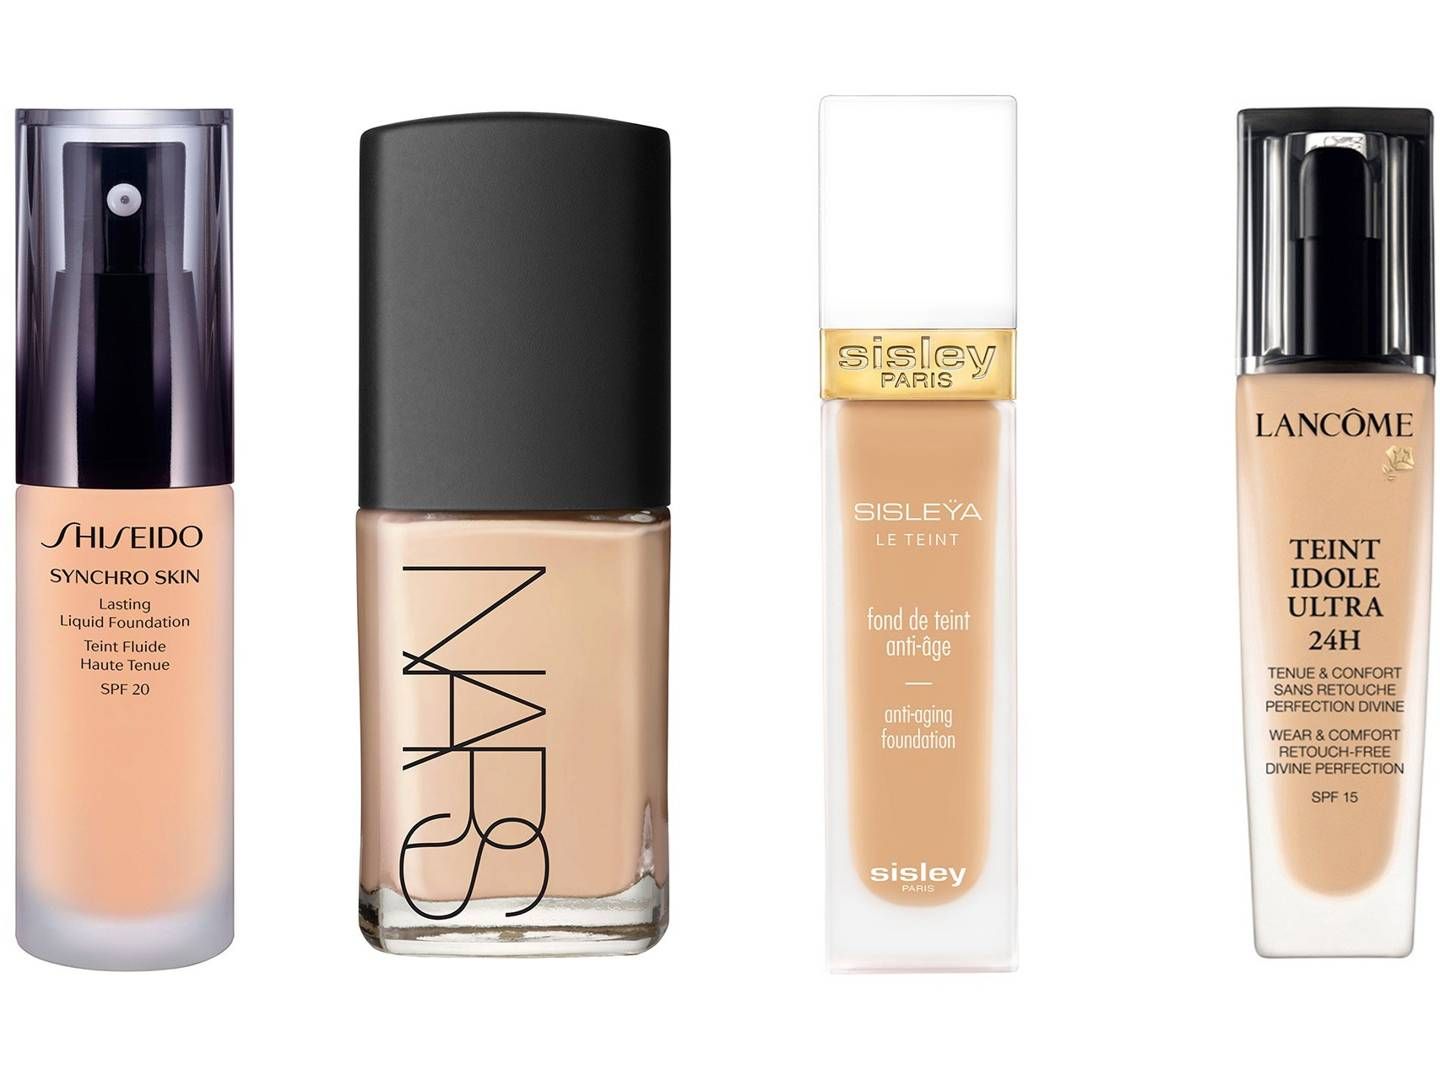 The Best Foundations For Your Wedding According To Celebrity